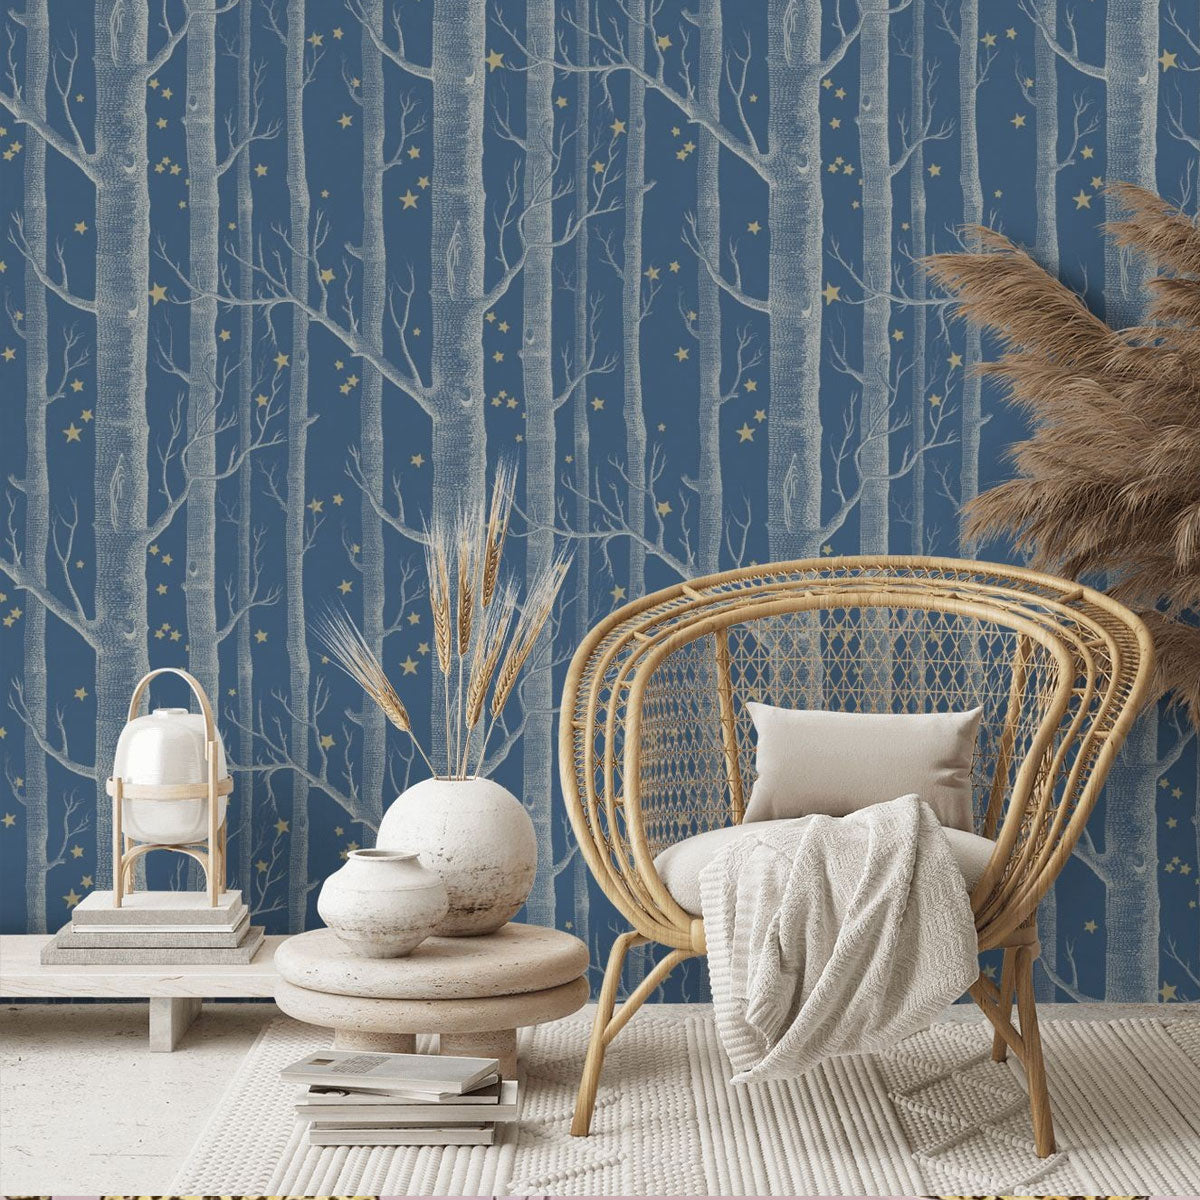 300 Ways with Woods ideas  cole and son design iconic wallpaper